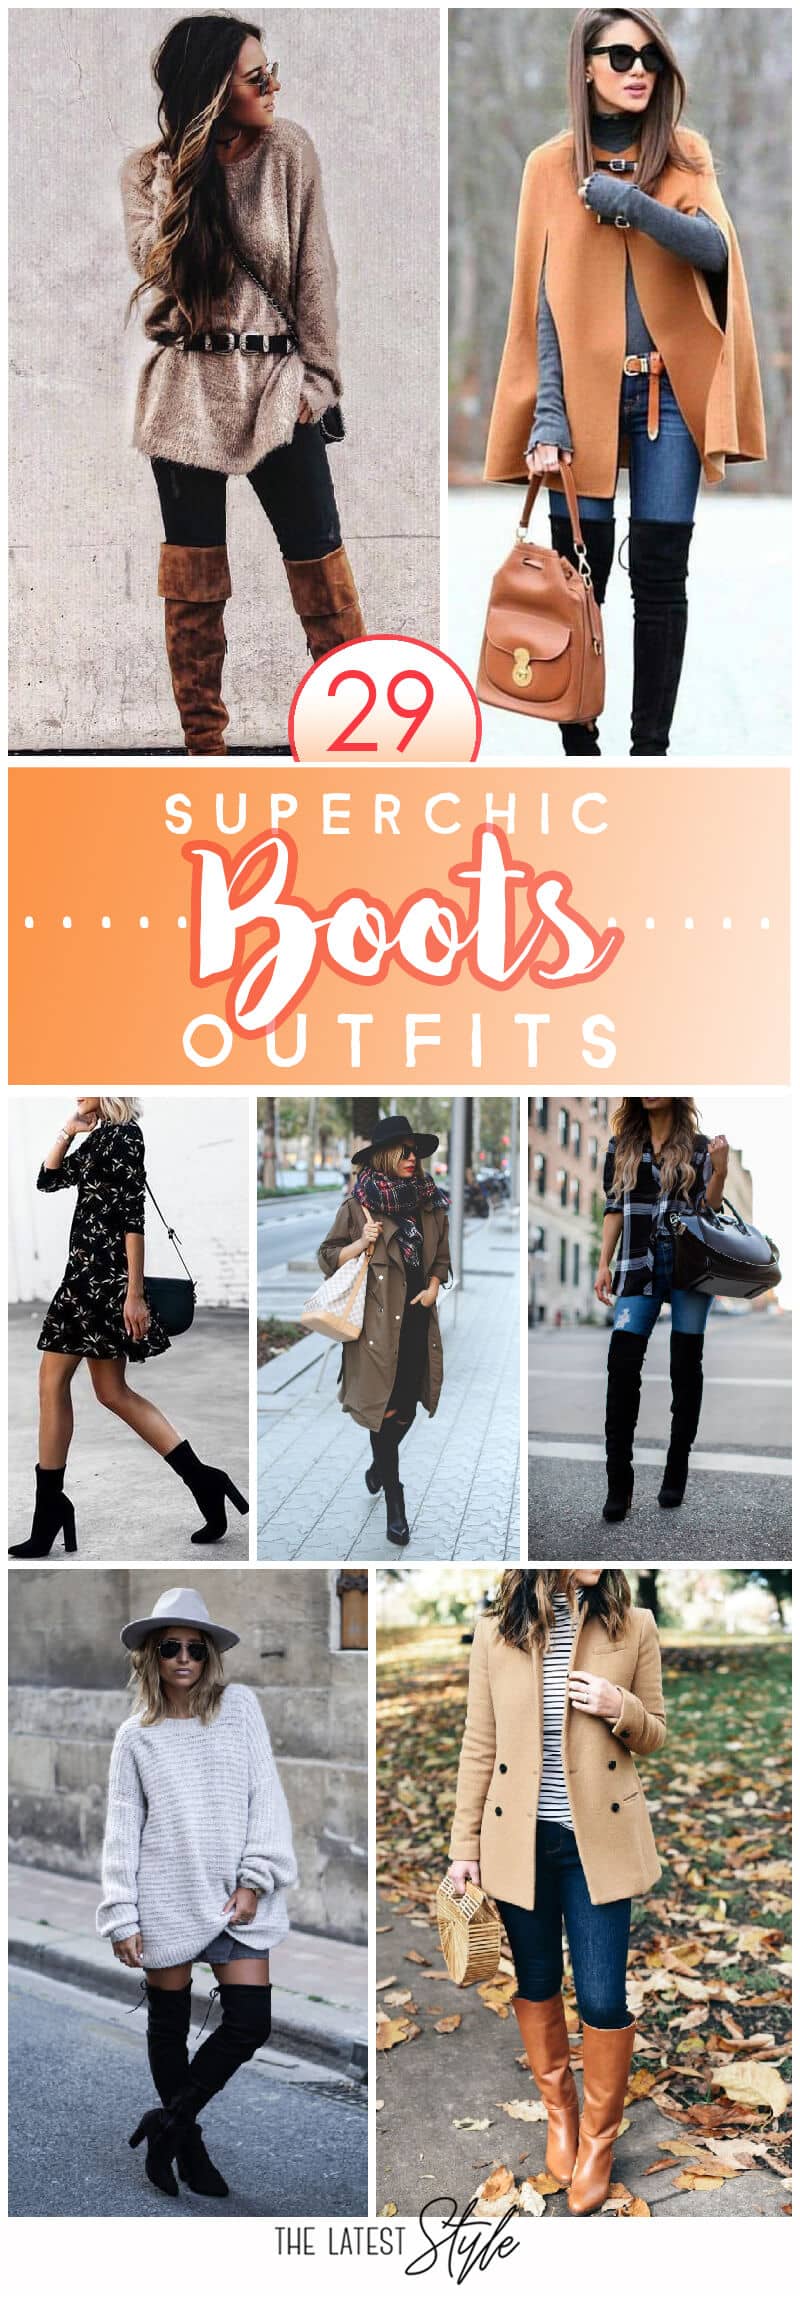 29 Super Chic Fall Outfits With Boots